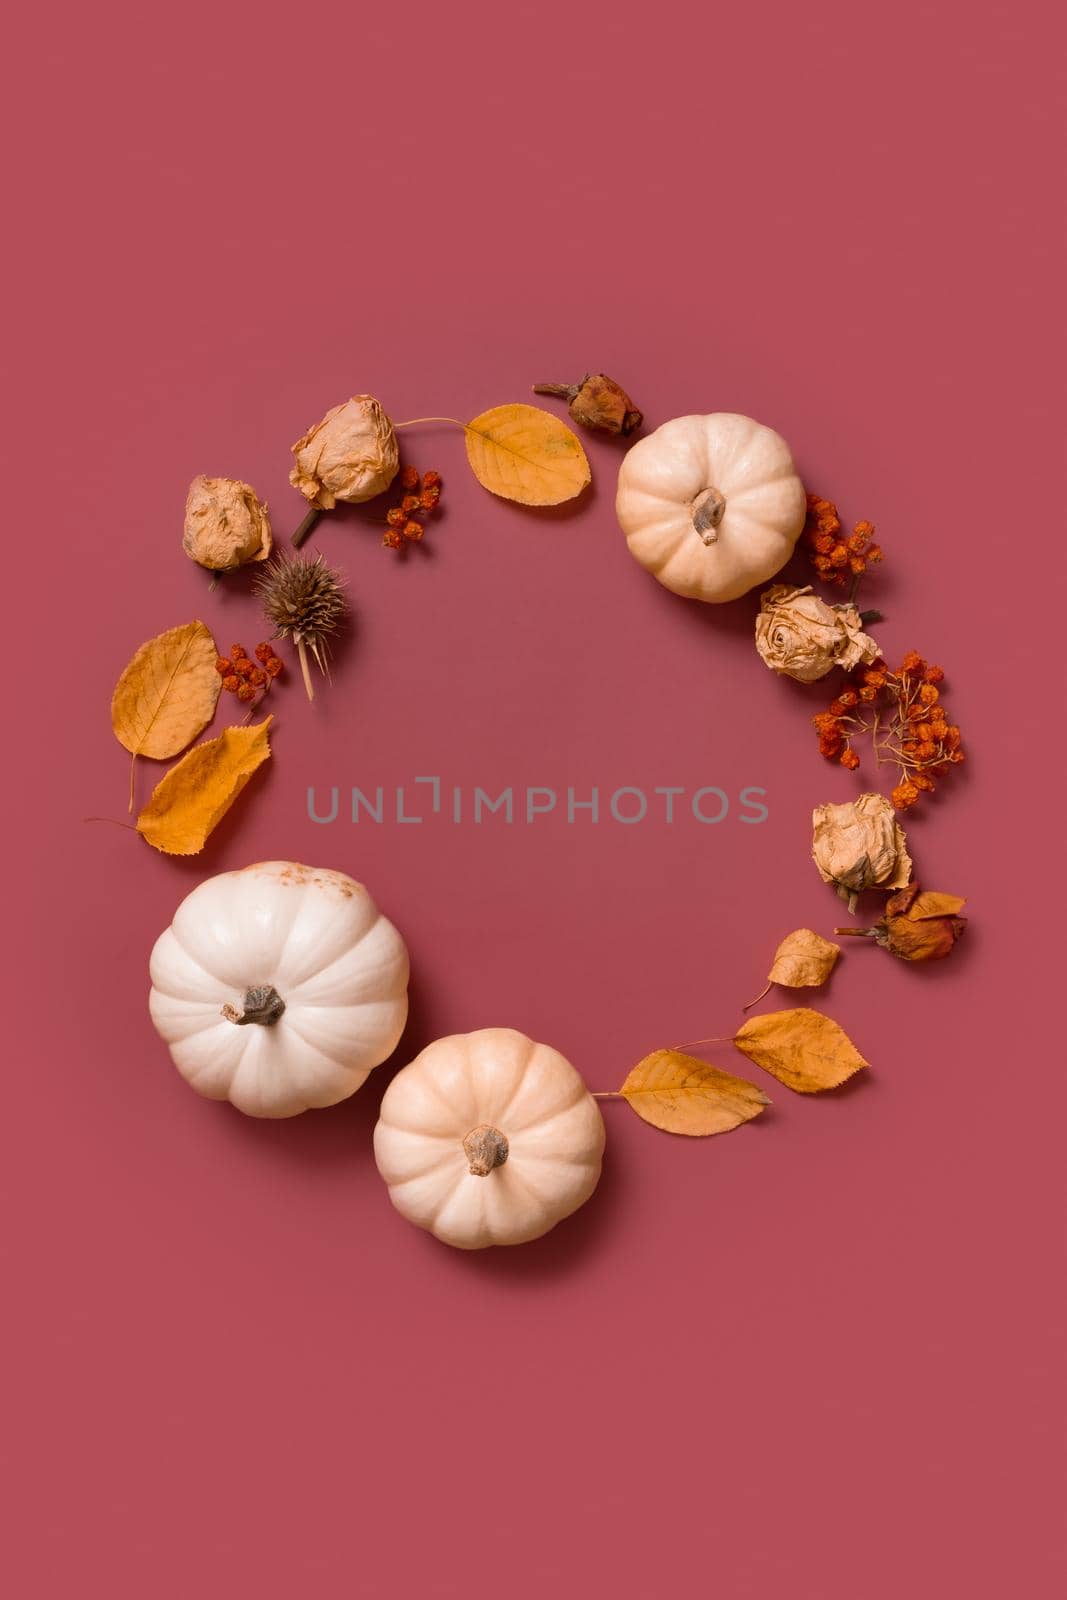 Autumn flat lay wreath of pumpkin, leaves and flowers with berries top view. Vertical format with copy space.